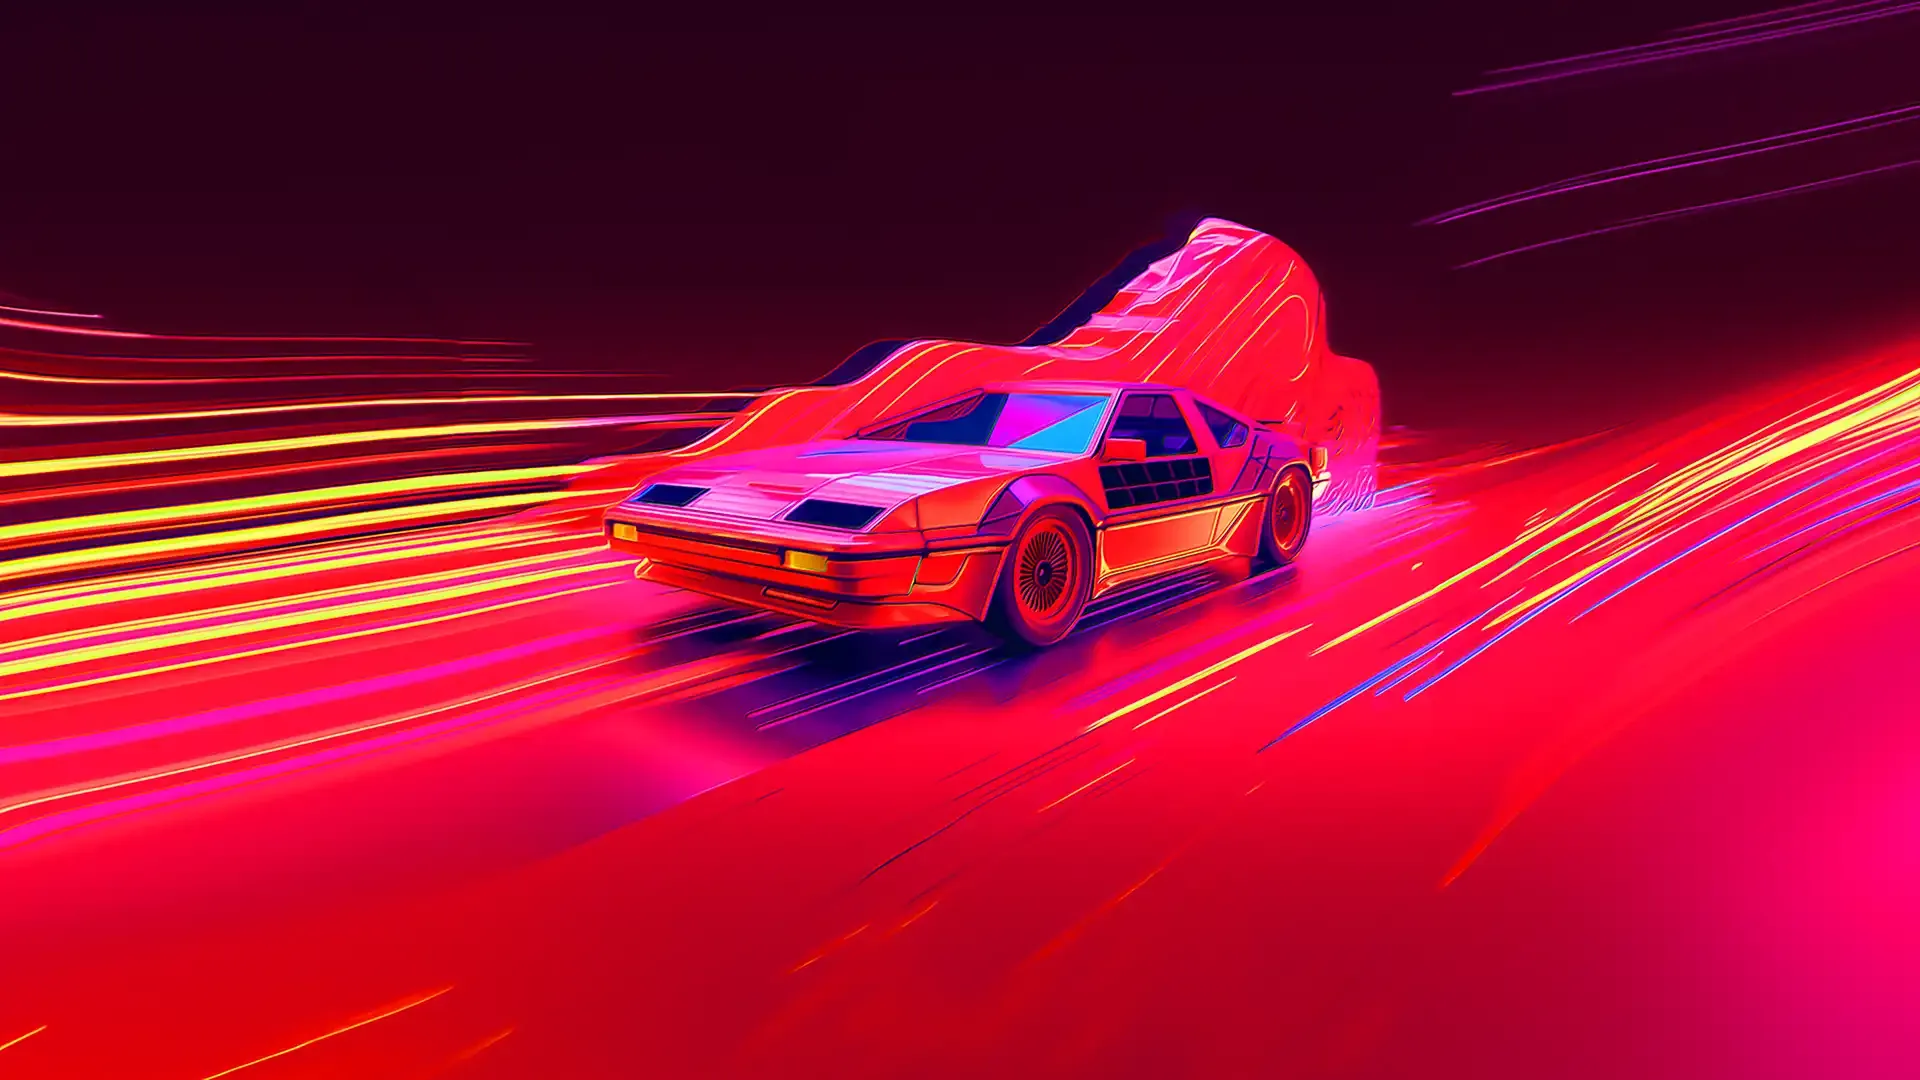 heroscreen 4k pc wallpaper of a synthwave car illustration, wallpaper for free download